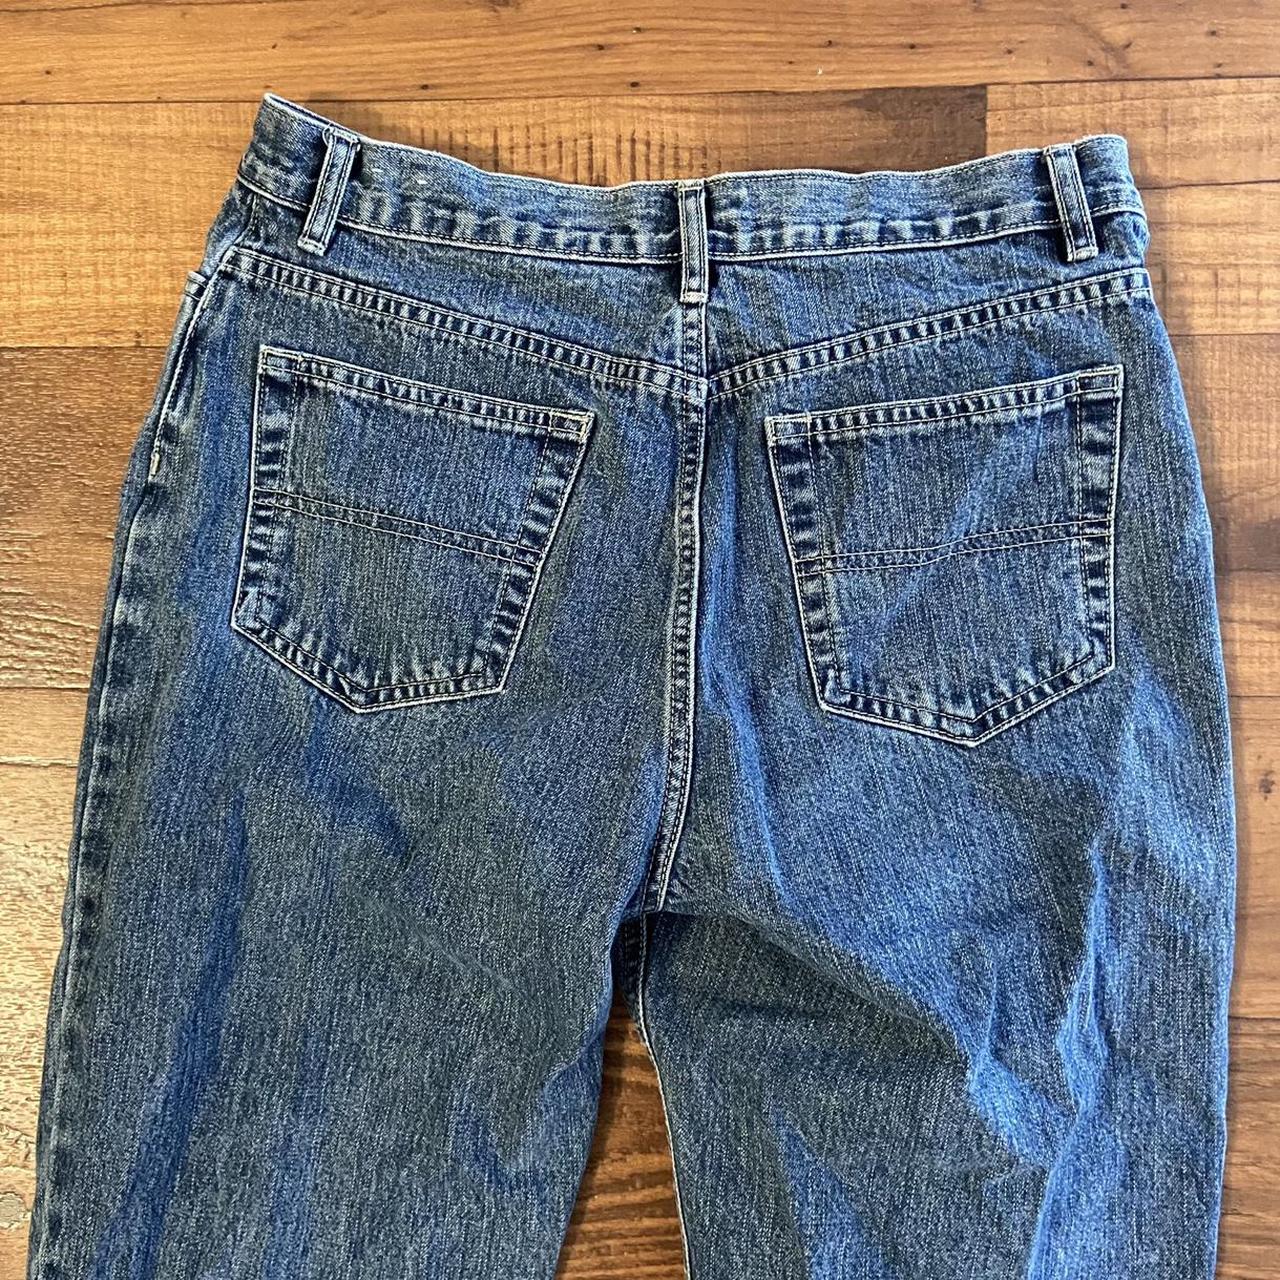 Vintage St. john’s Bay jeans with lines down the... - Depop